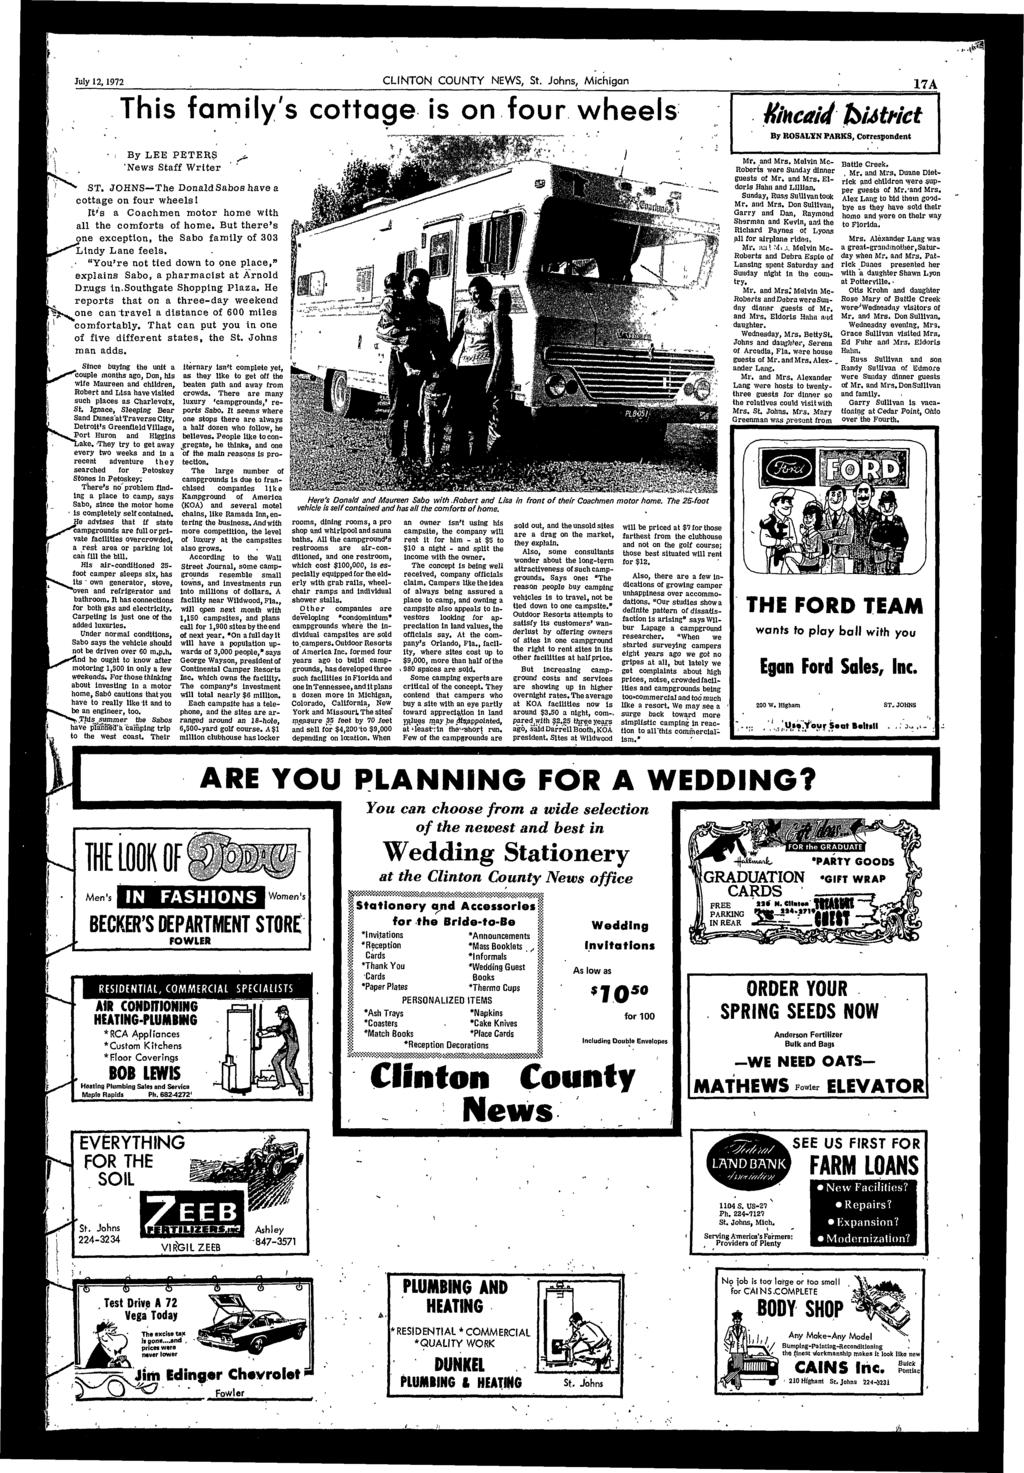 July 2,972 CLINTON COUNTY NEWS, St.